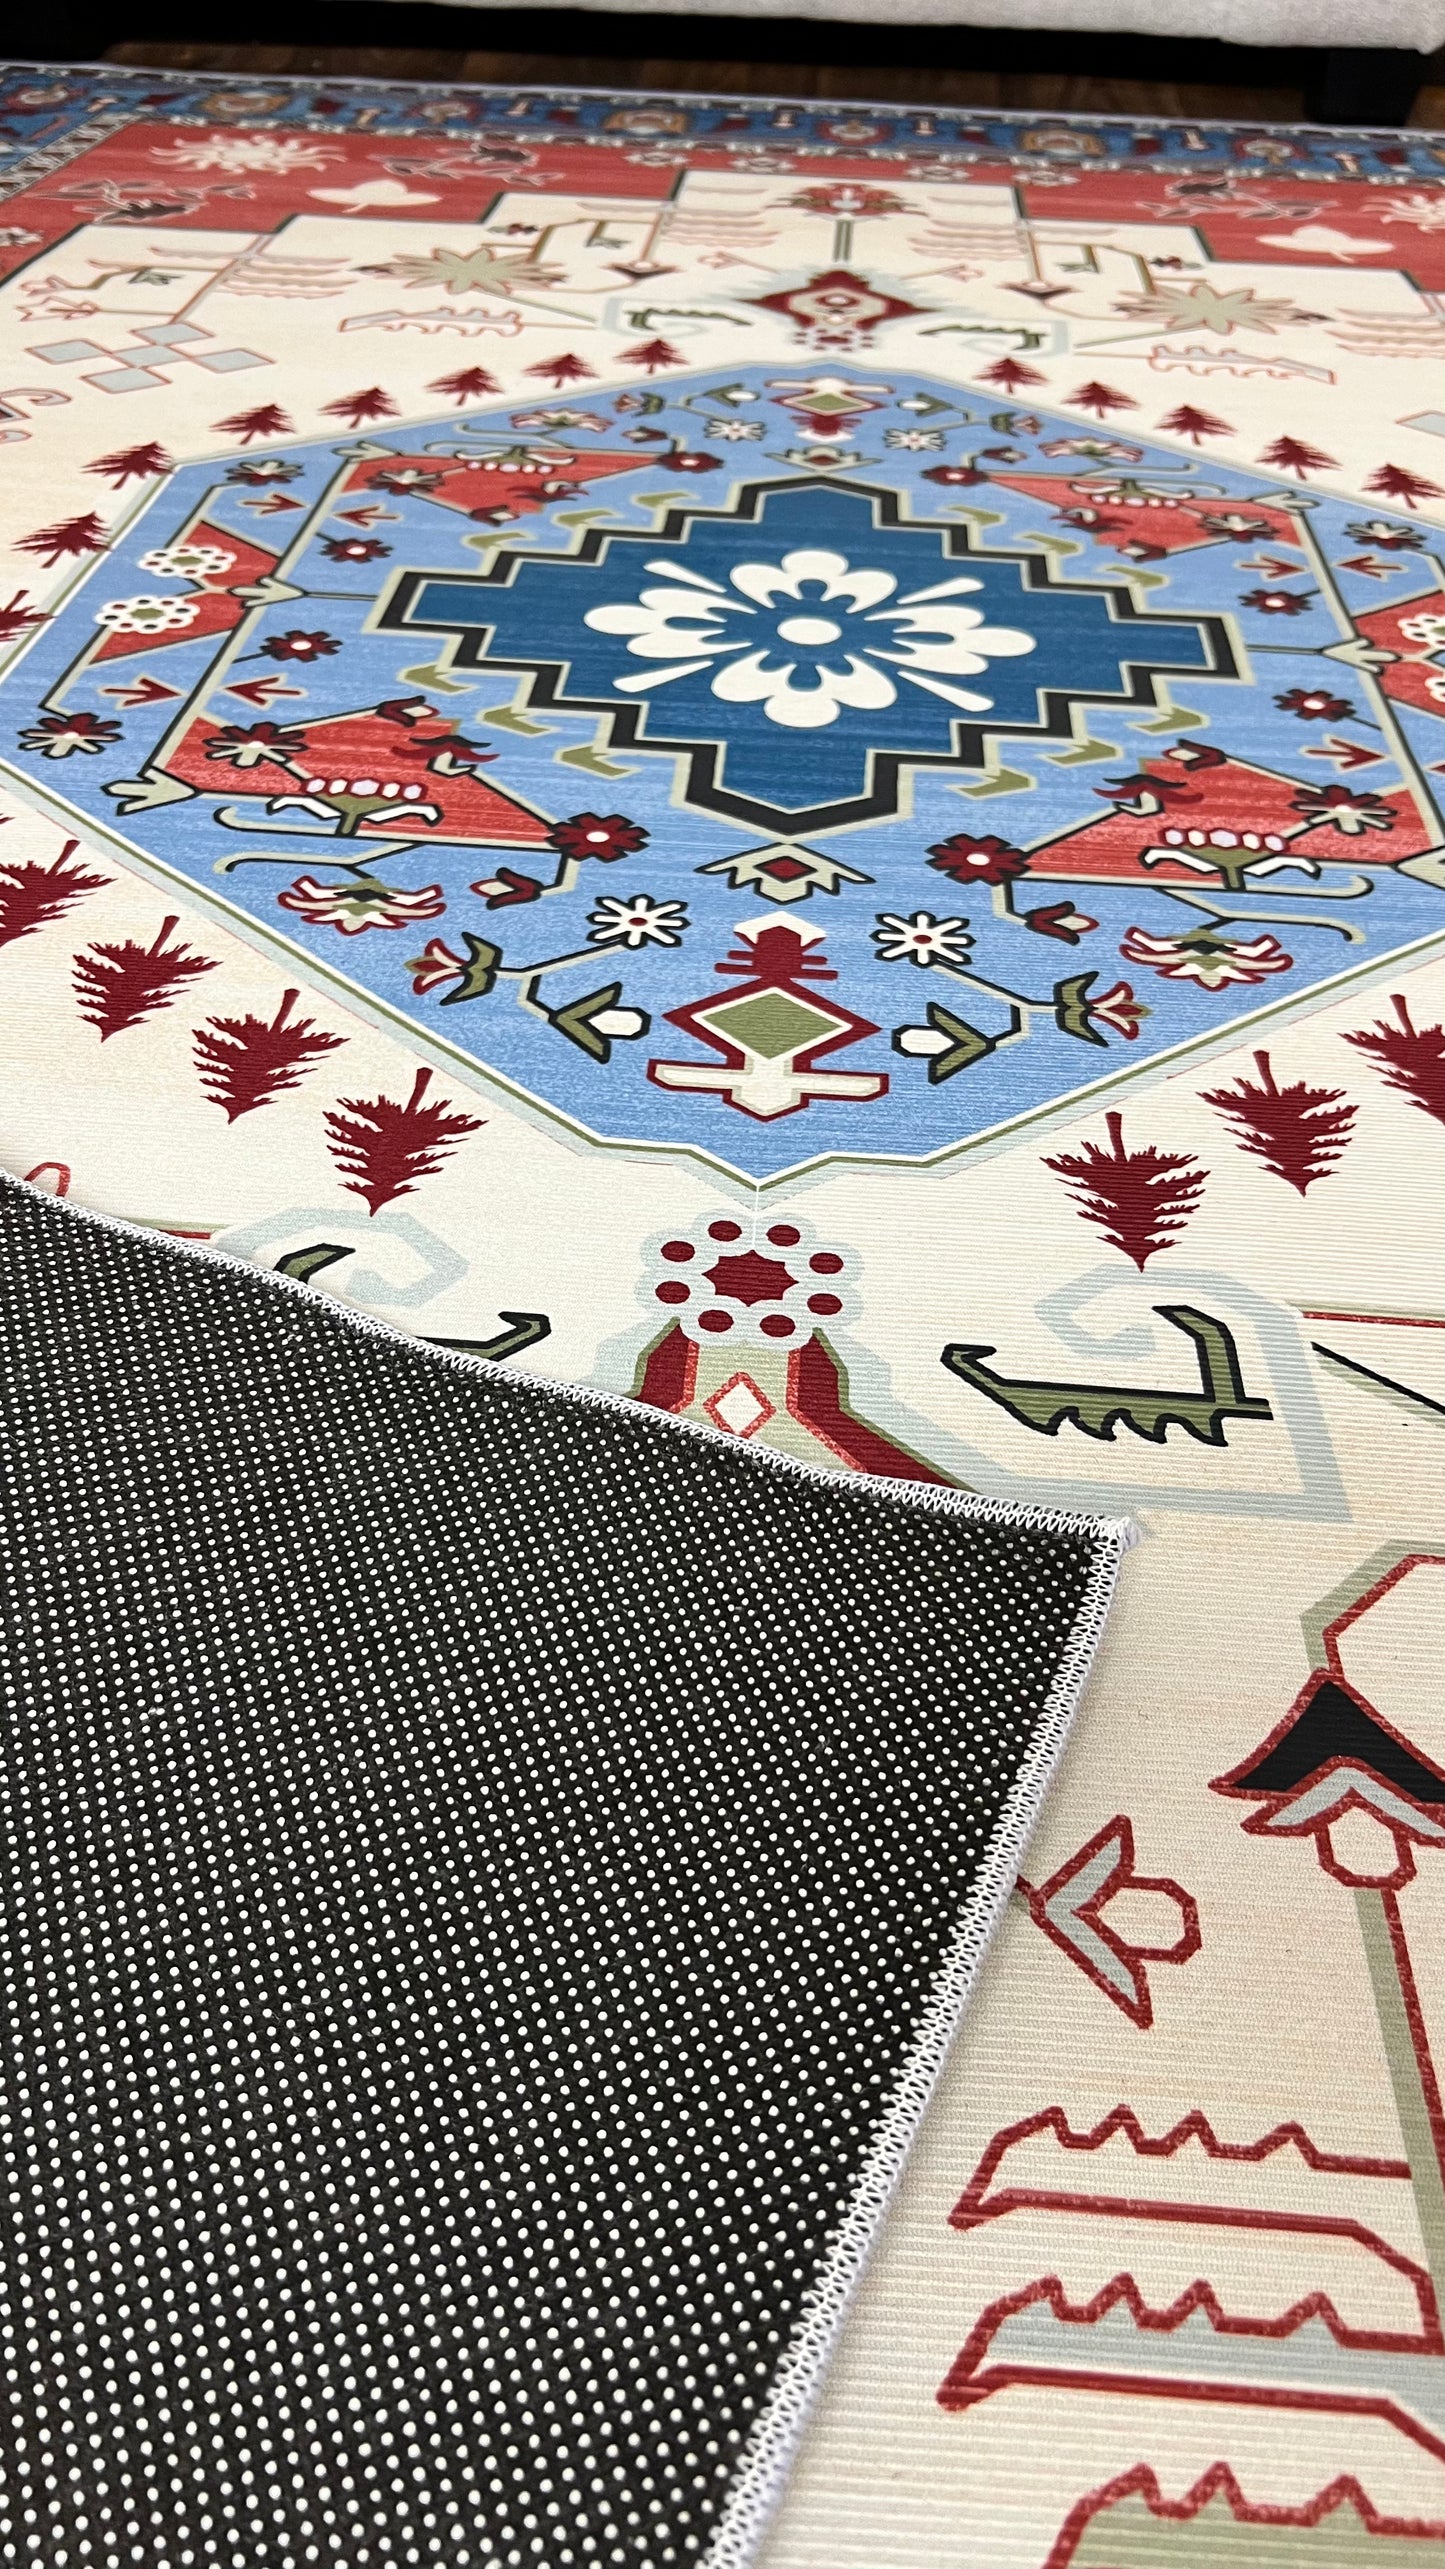 Artful Traditions: Discover Our Persian Rug Collection